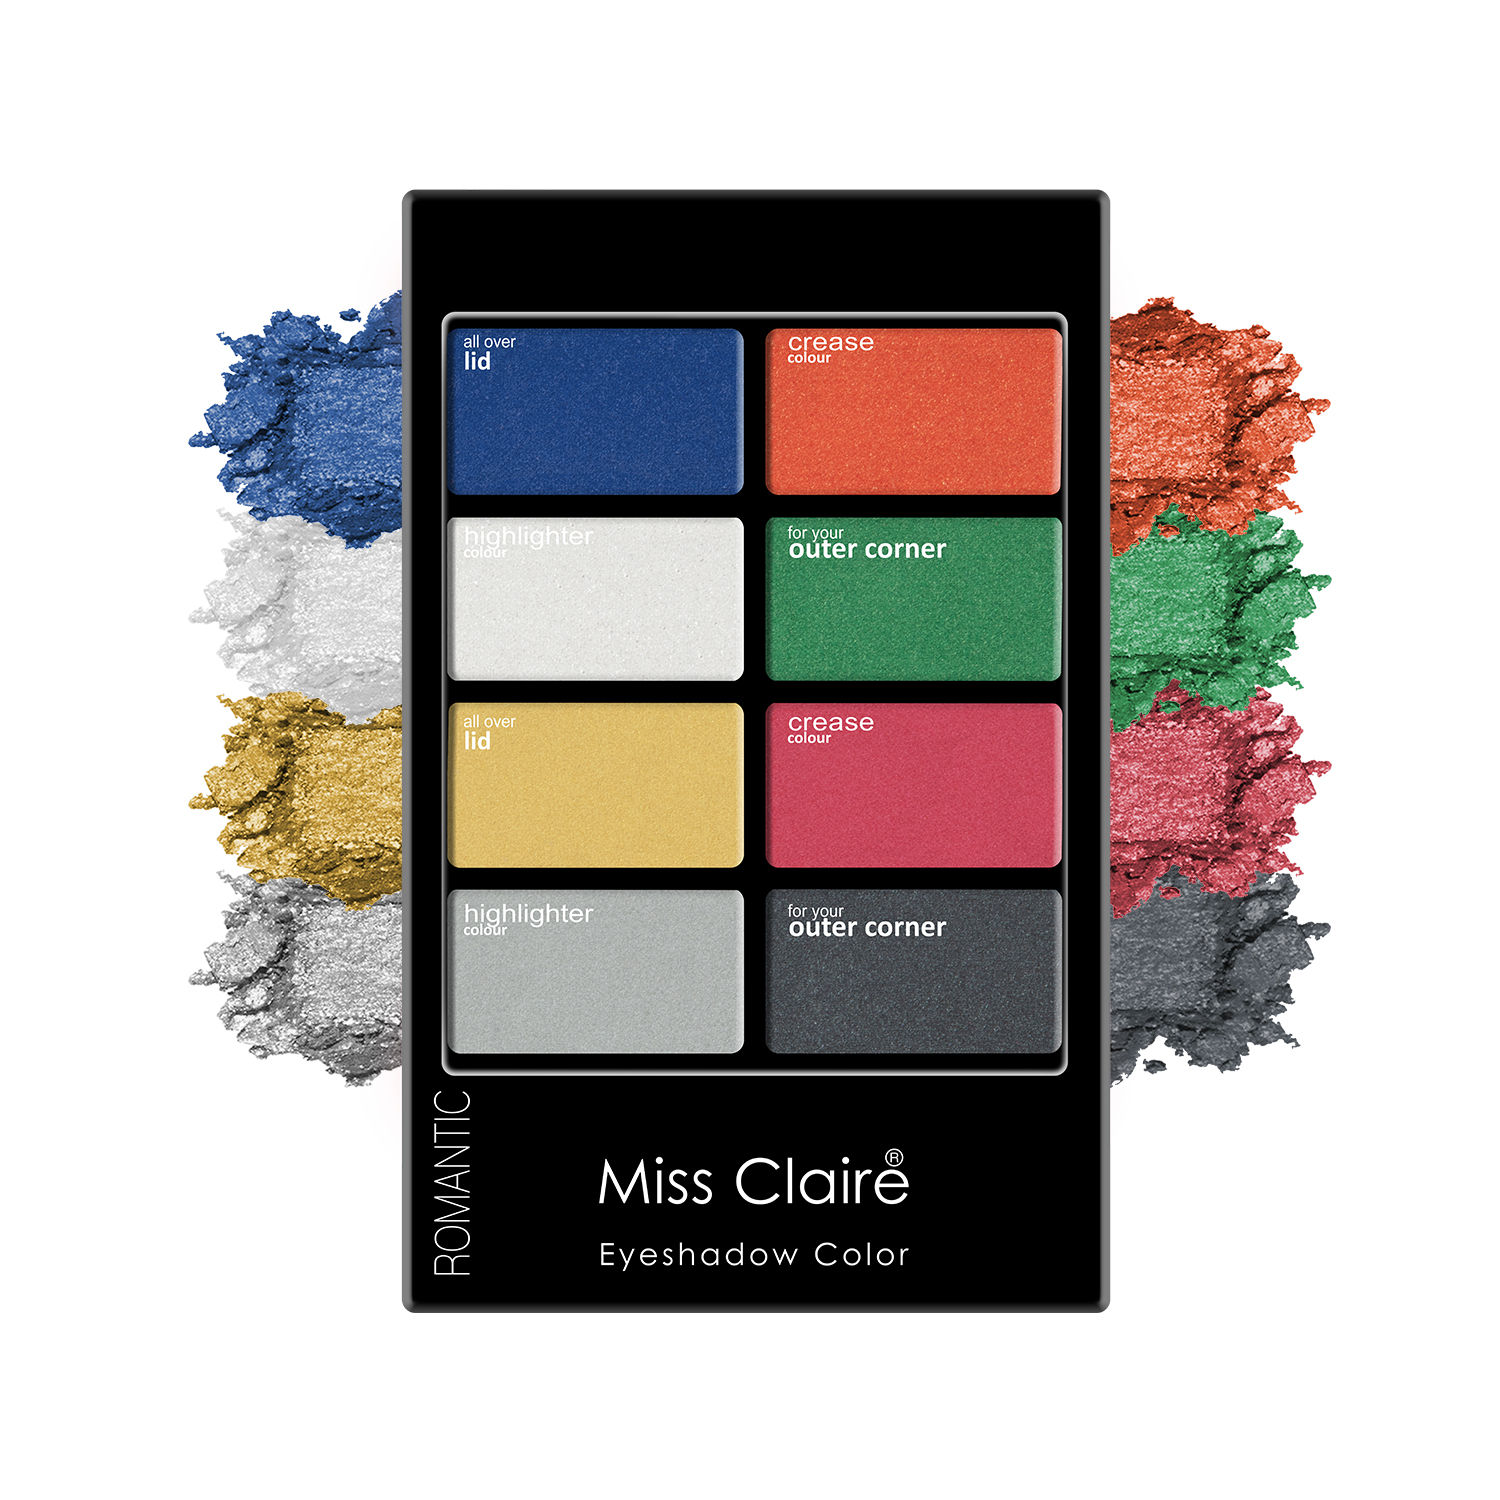 Miss Claire Eyeshadow Color - Romantic